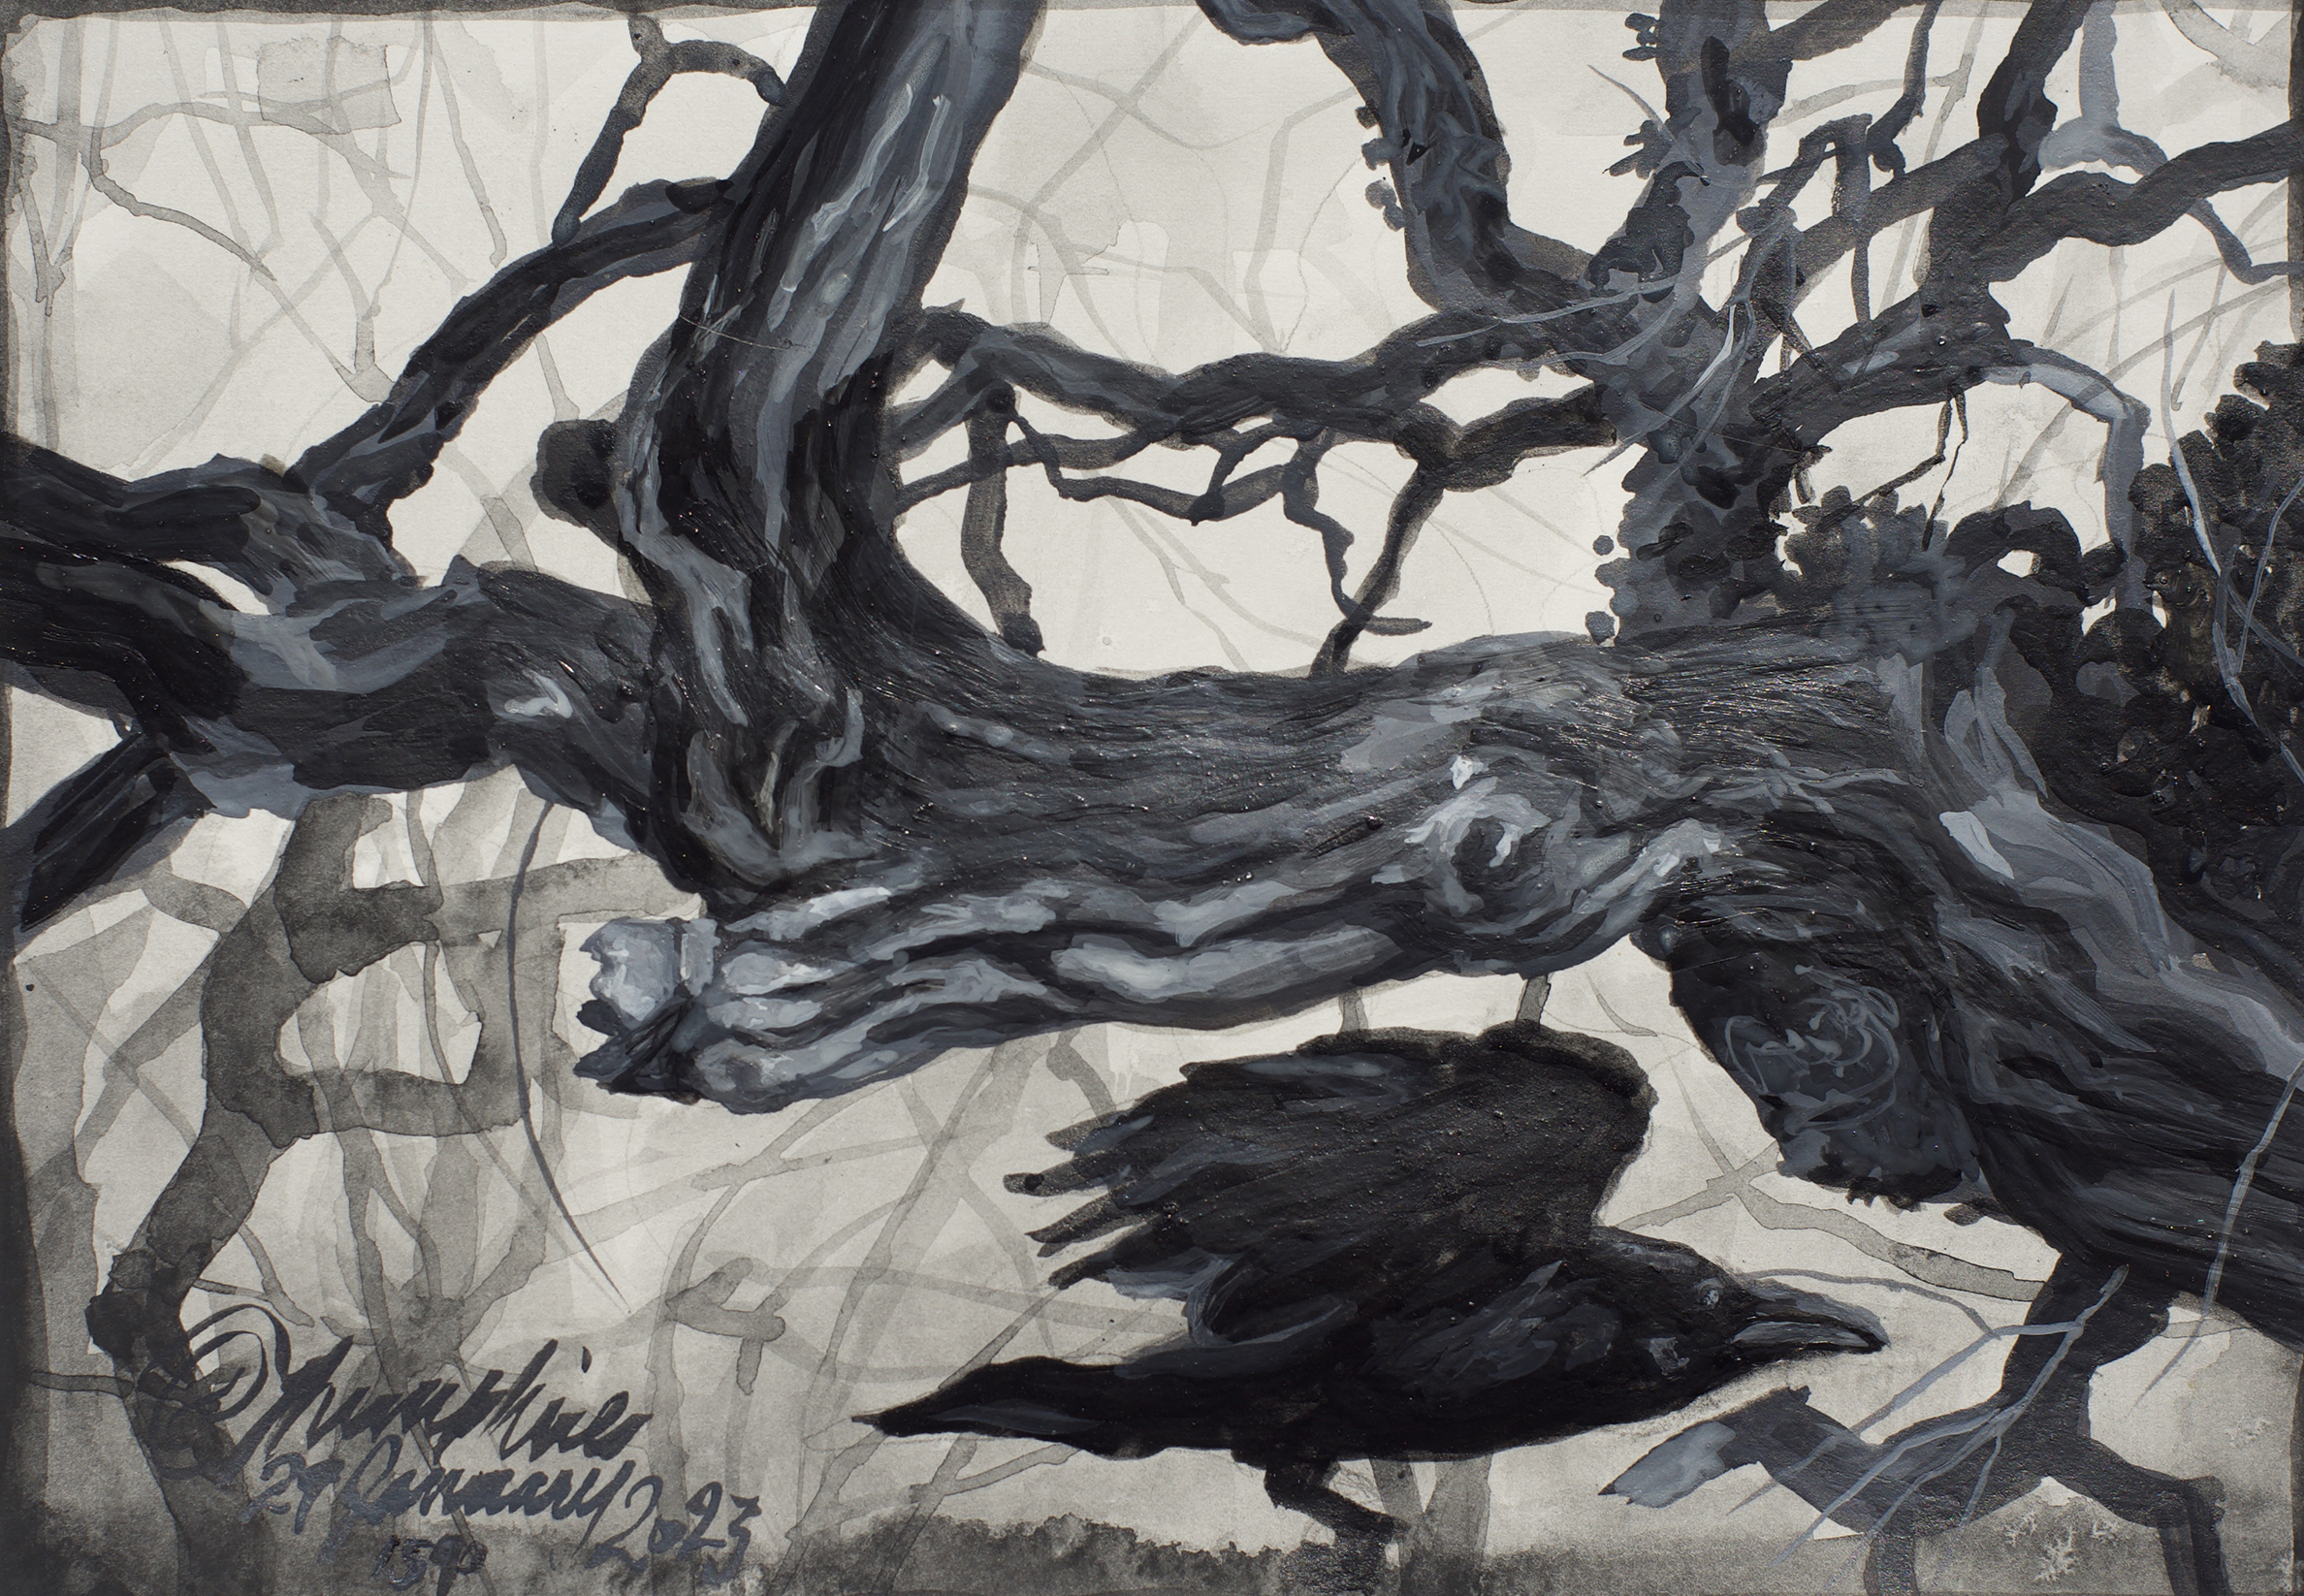 grayscale work on paper featuring a large black bird among a tangle of branches